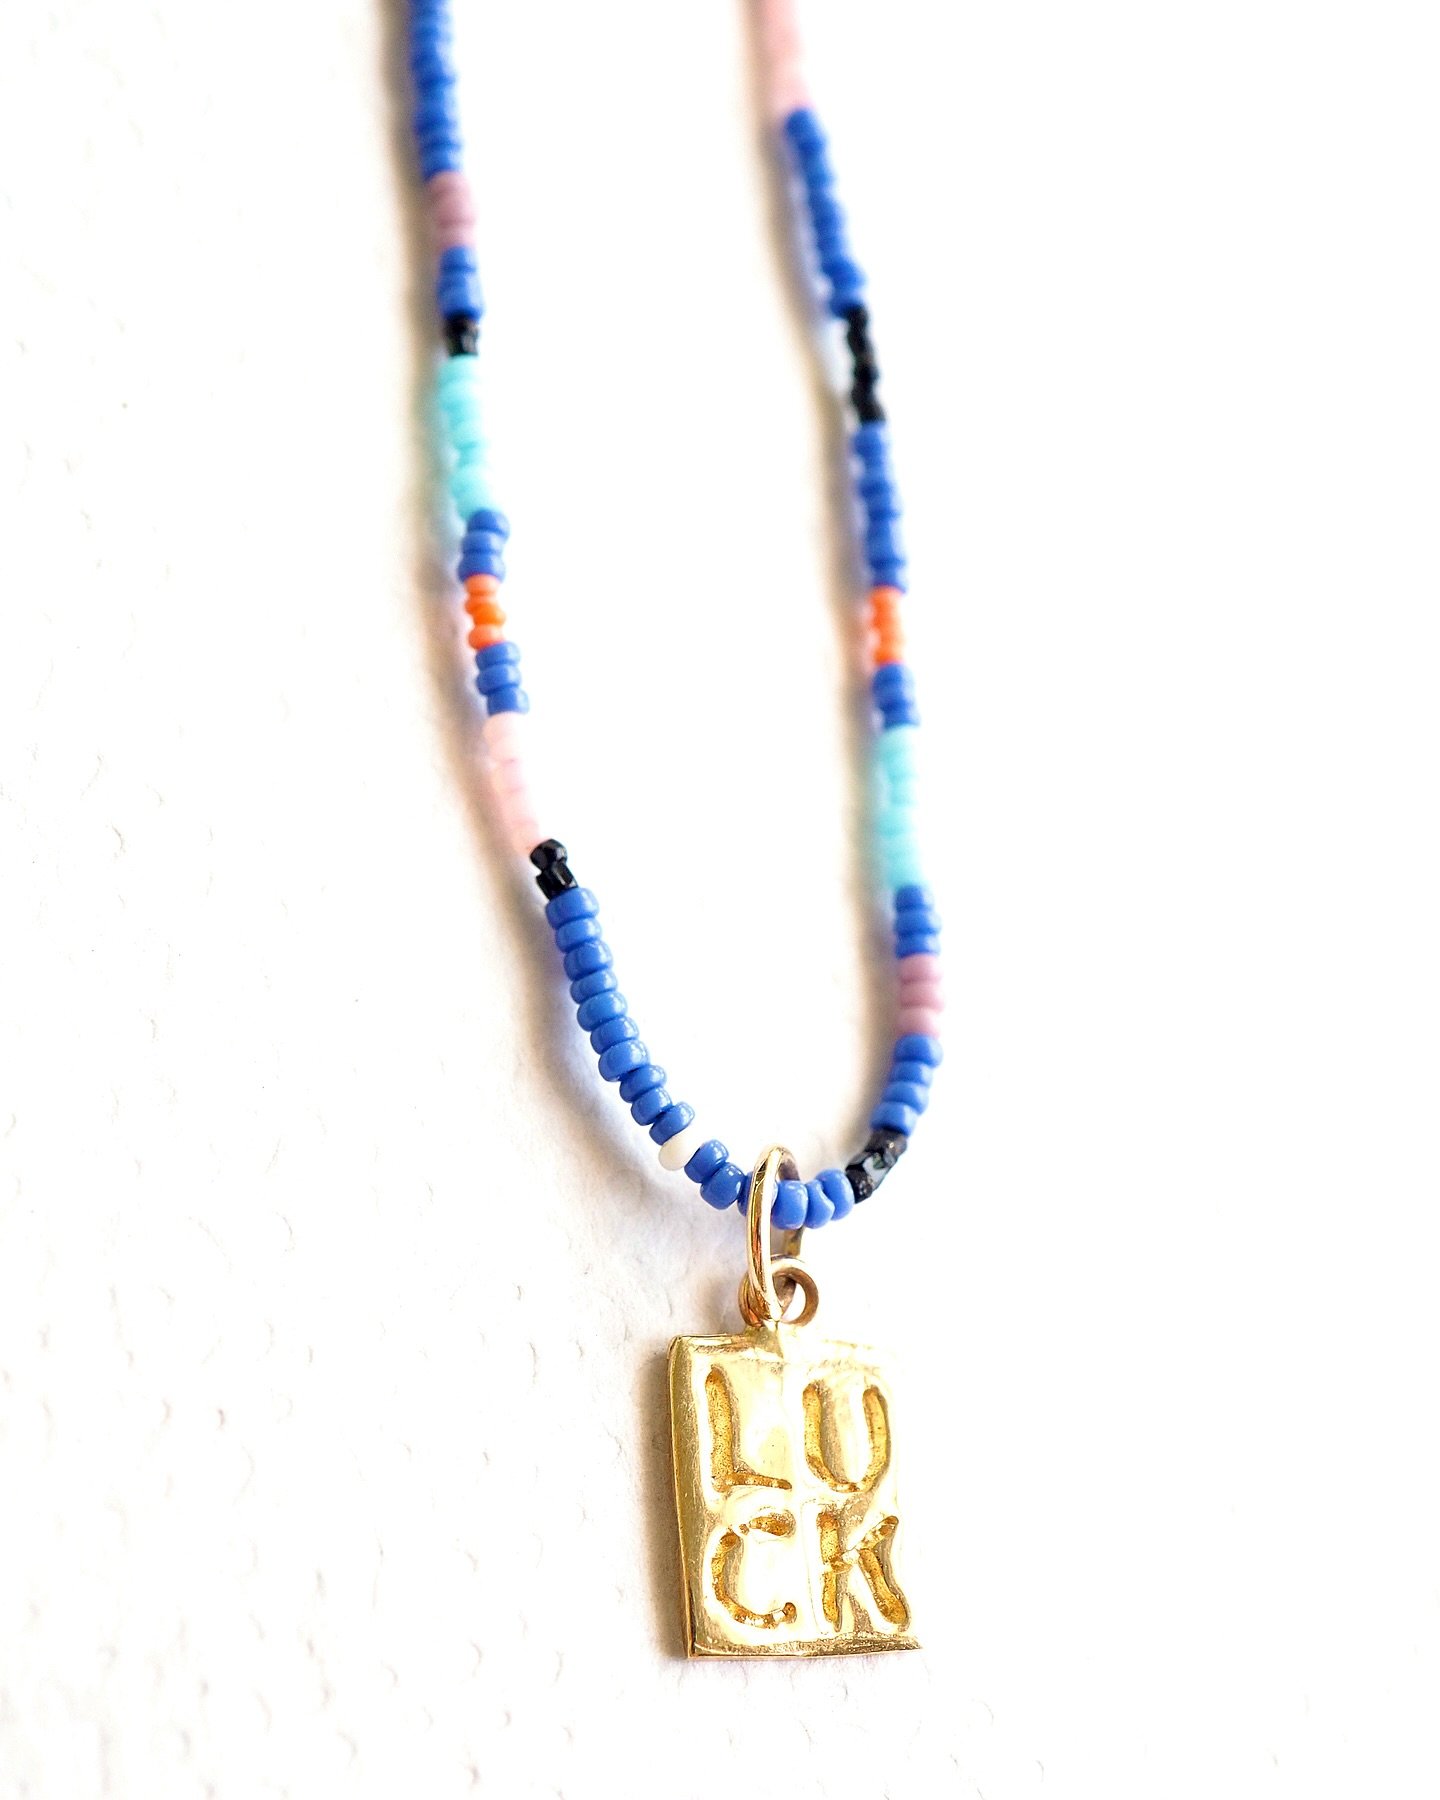 The #luckiest #charm - sculpted and inscribed by hand, cast in #14kgold.  #Vintage #Venetian micro seed bead #necklace sold separately.
.
.
.
#beadedjewelry #finejewellery #finejewelry #charms #goldcharm #charmnecklace #mexico #puertovallarta